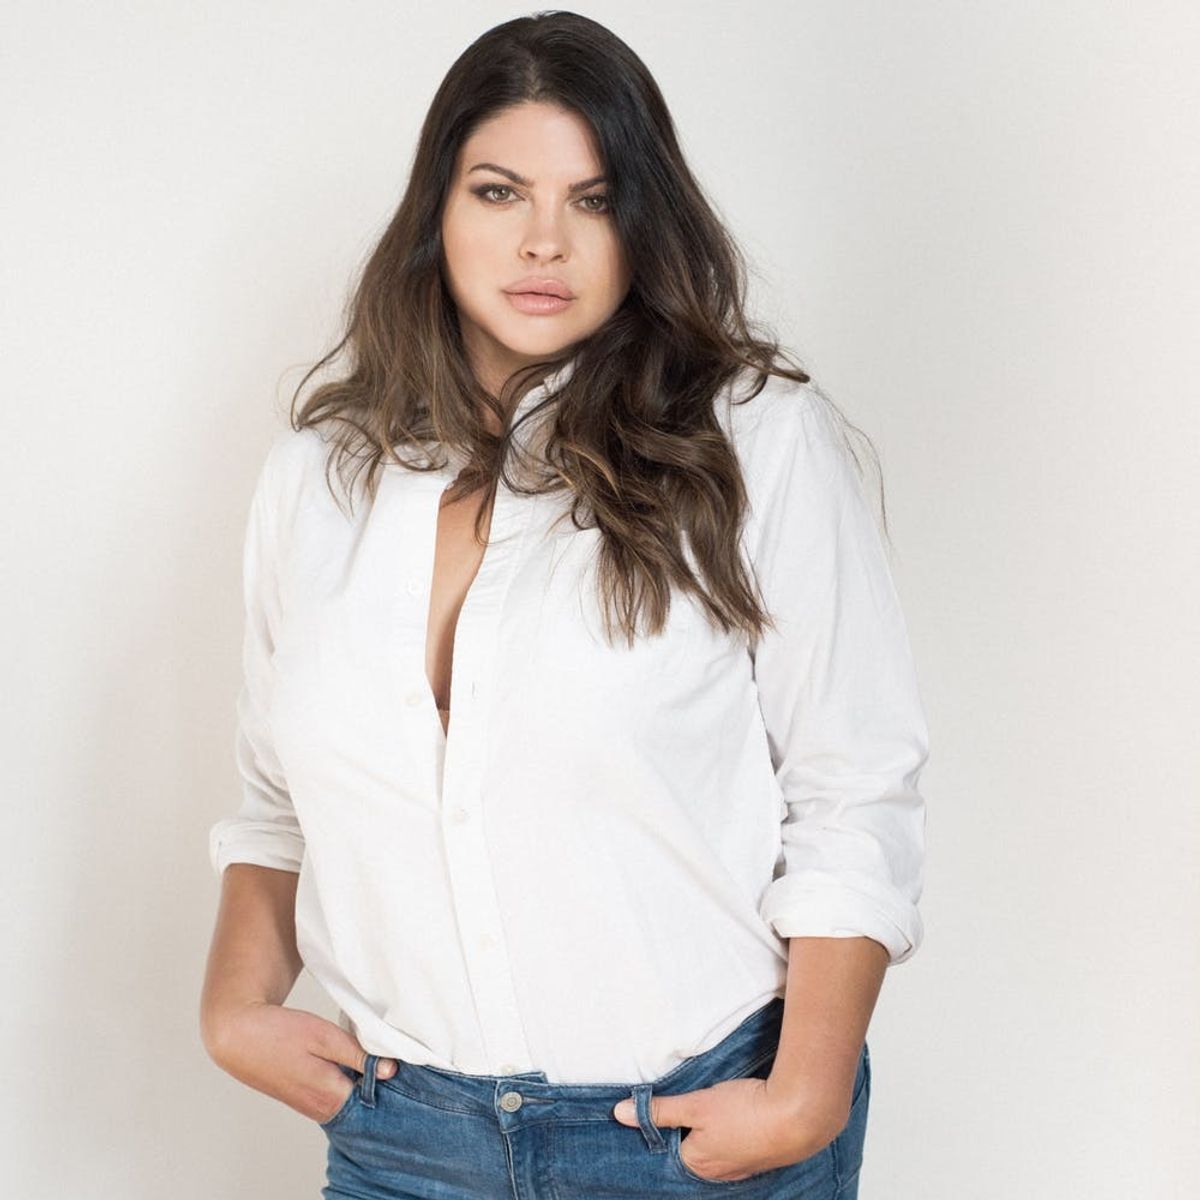 Plus-Size Models Laura Lee and Melinda Parrish on What ‘Body Positivity’ Means When Your Body Is Your Job